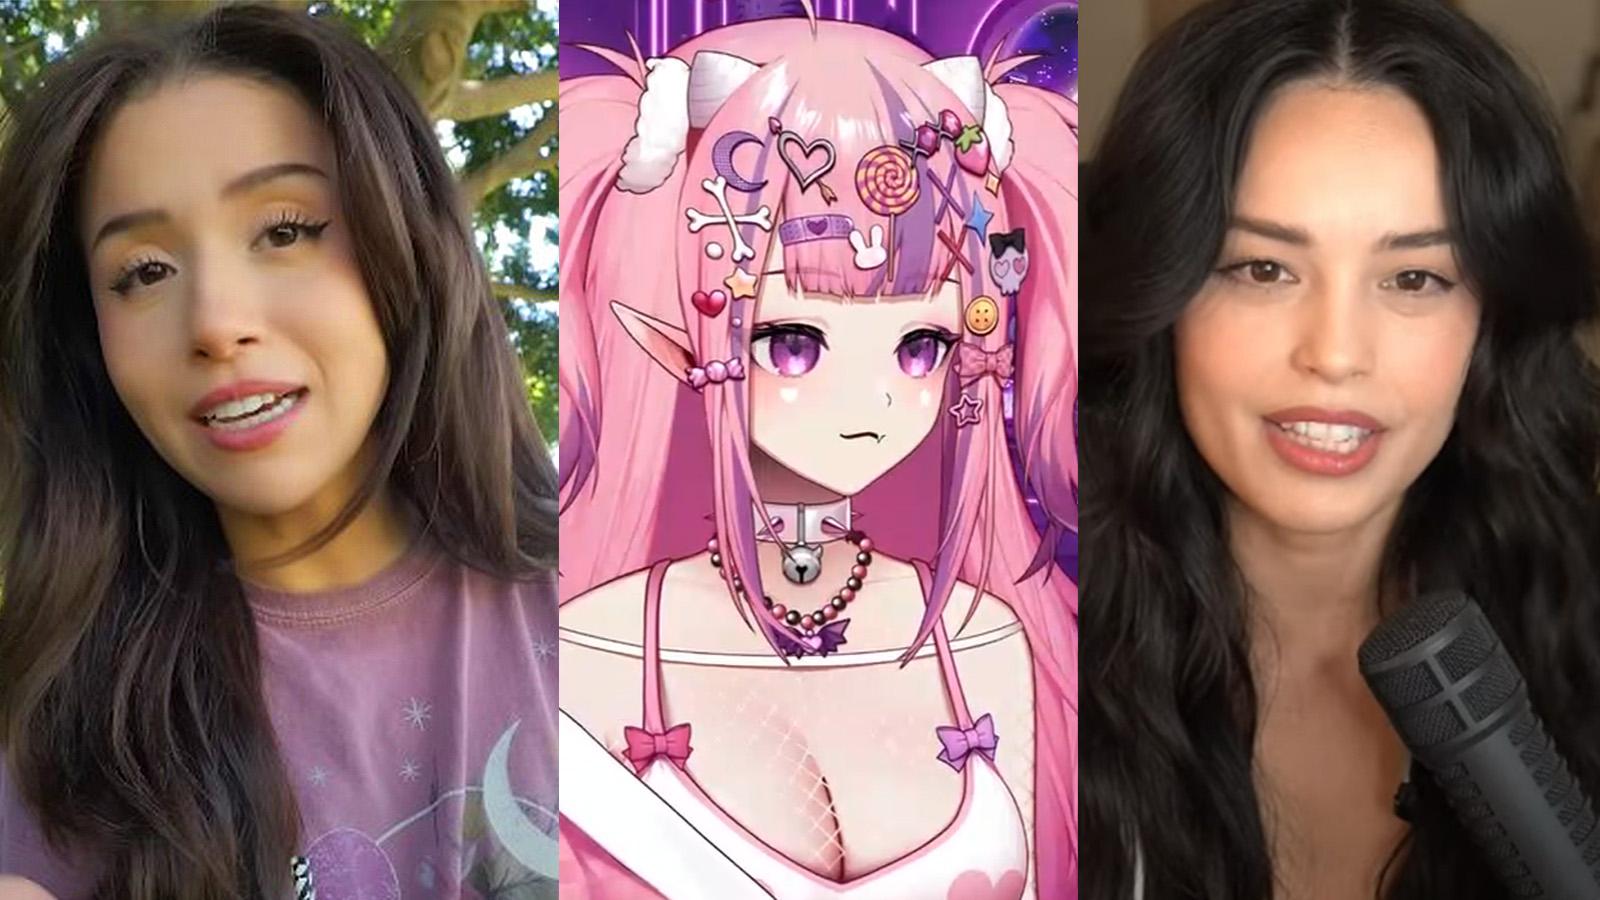 Pokimane on left, Ironmouse in middle, Valkyrae on right